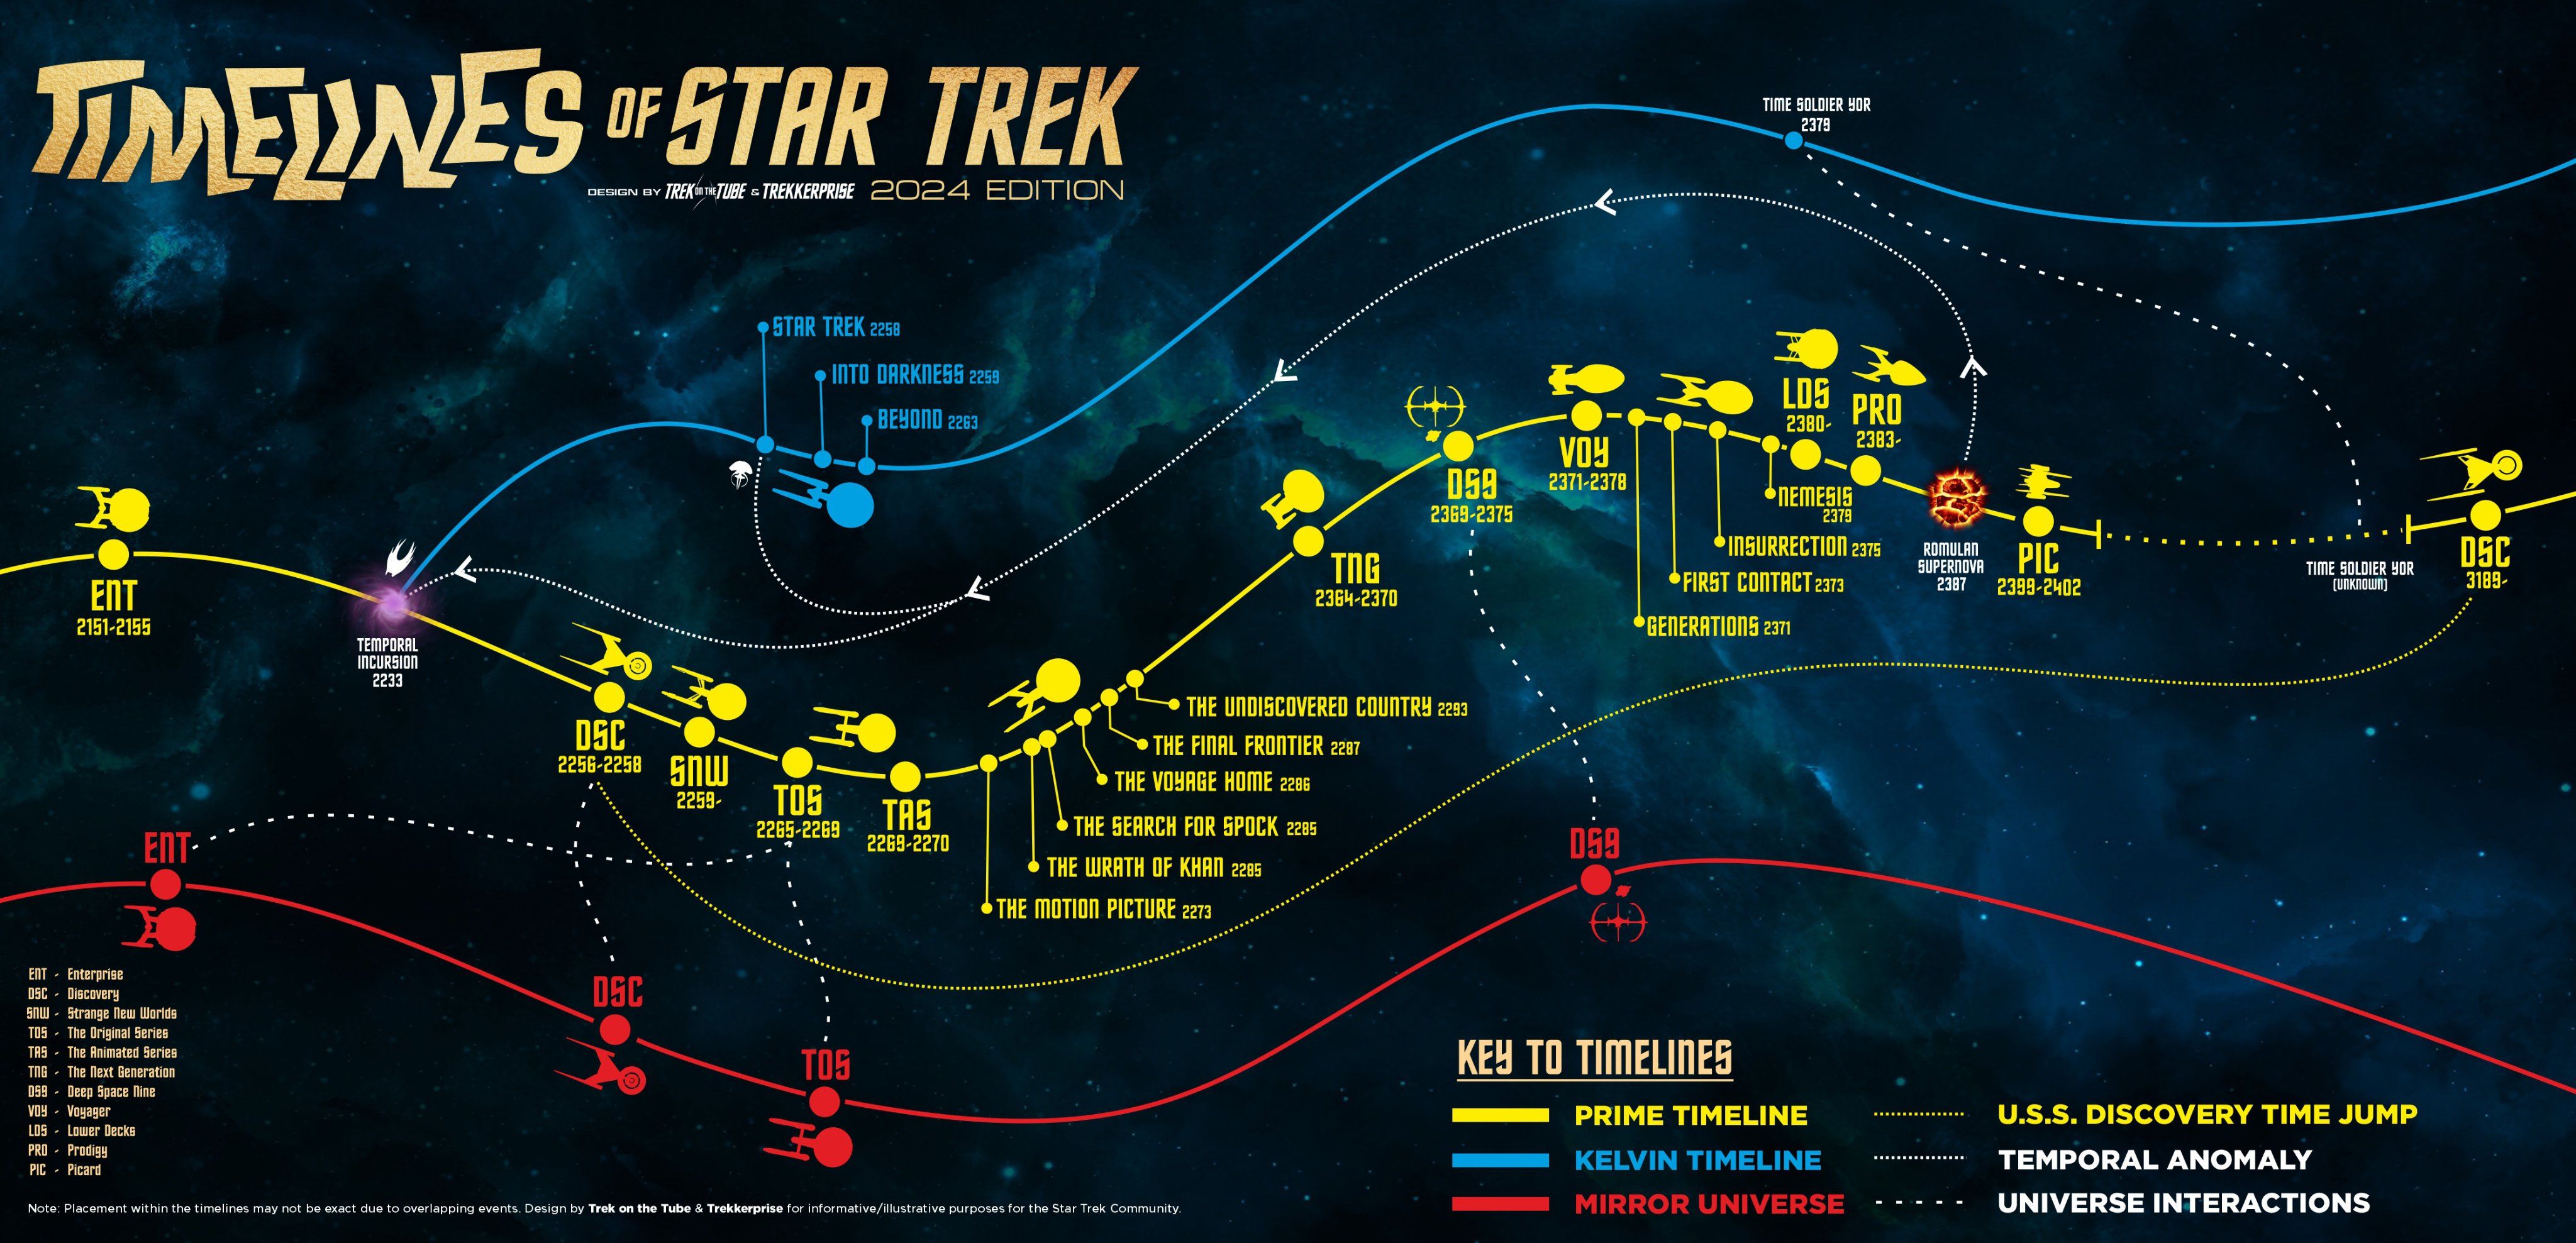 Star Trek’s Multiverse: 3 Timelines Updated With Every TV Show & Movie (So Far)